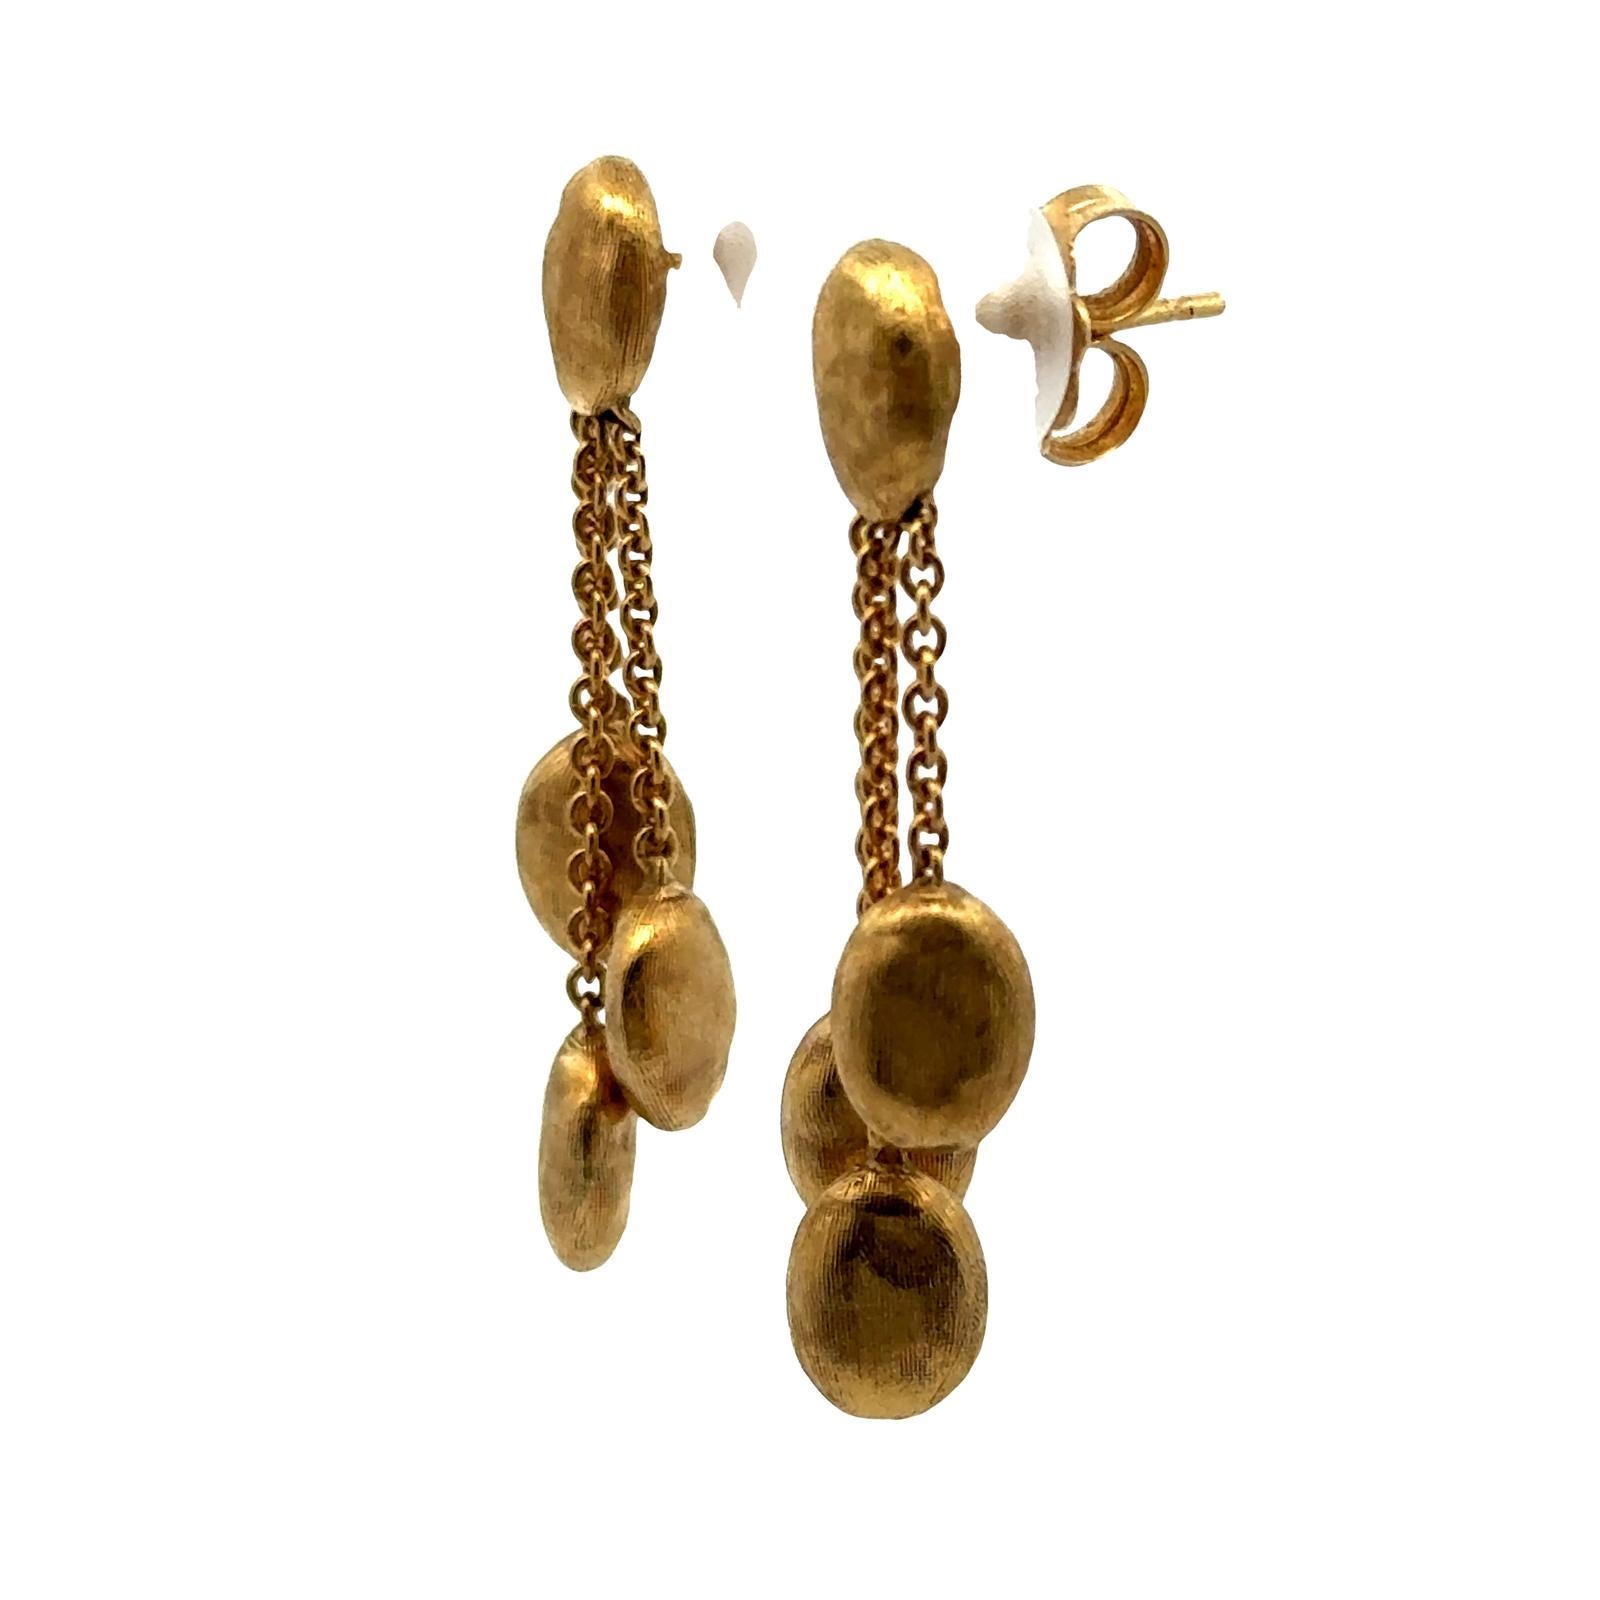 Marco Bicego Siviglia 18 Karat Yellow Gold Dangle Modern Earrings In Excellent Condition For Sale In Boca Raton, FL